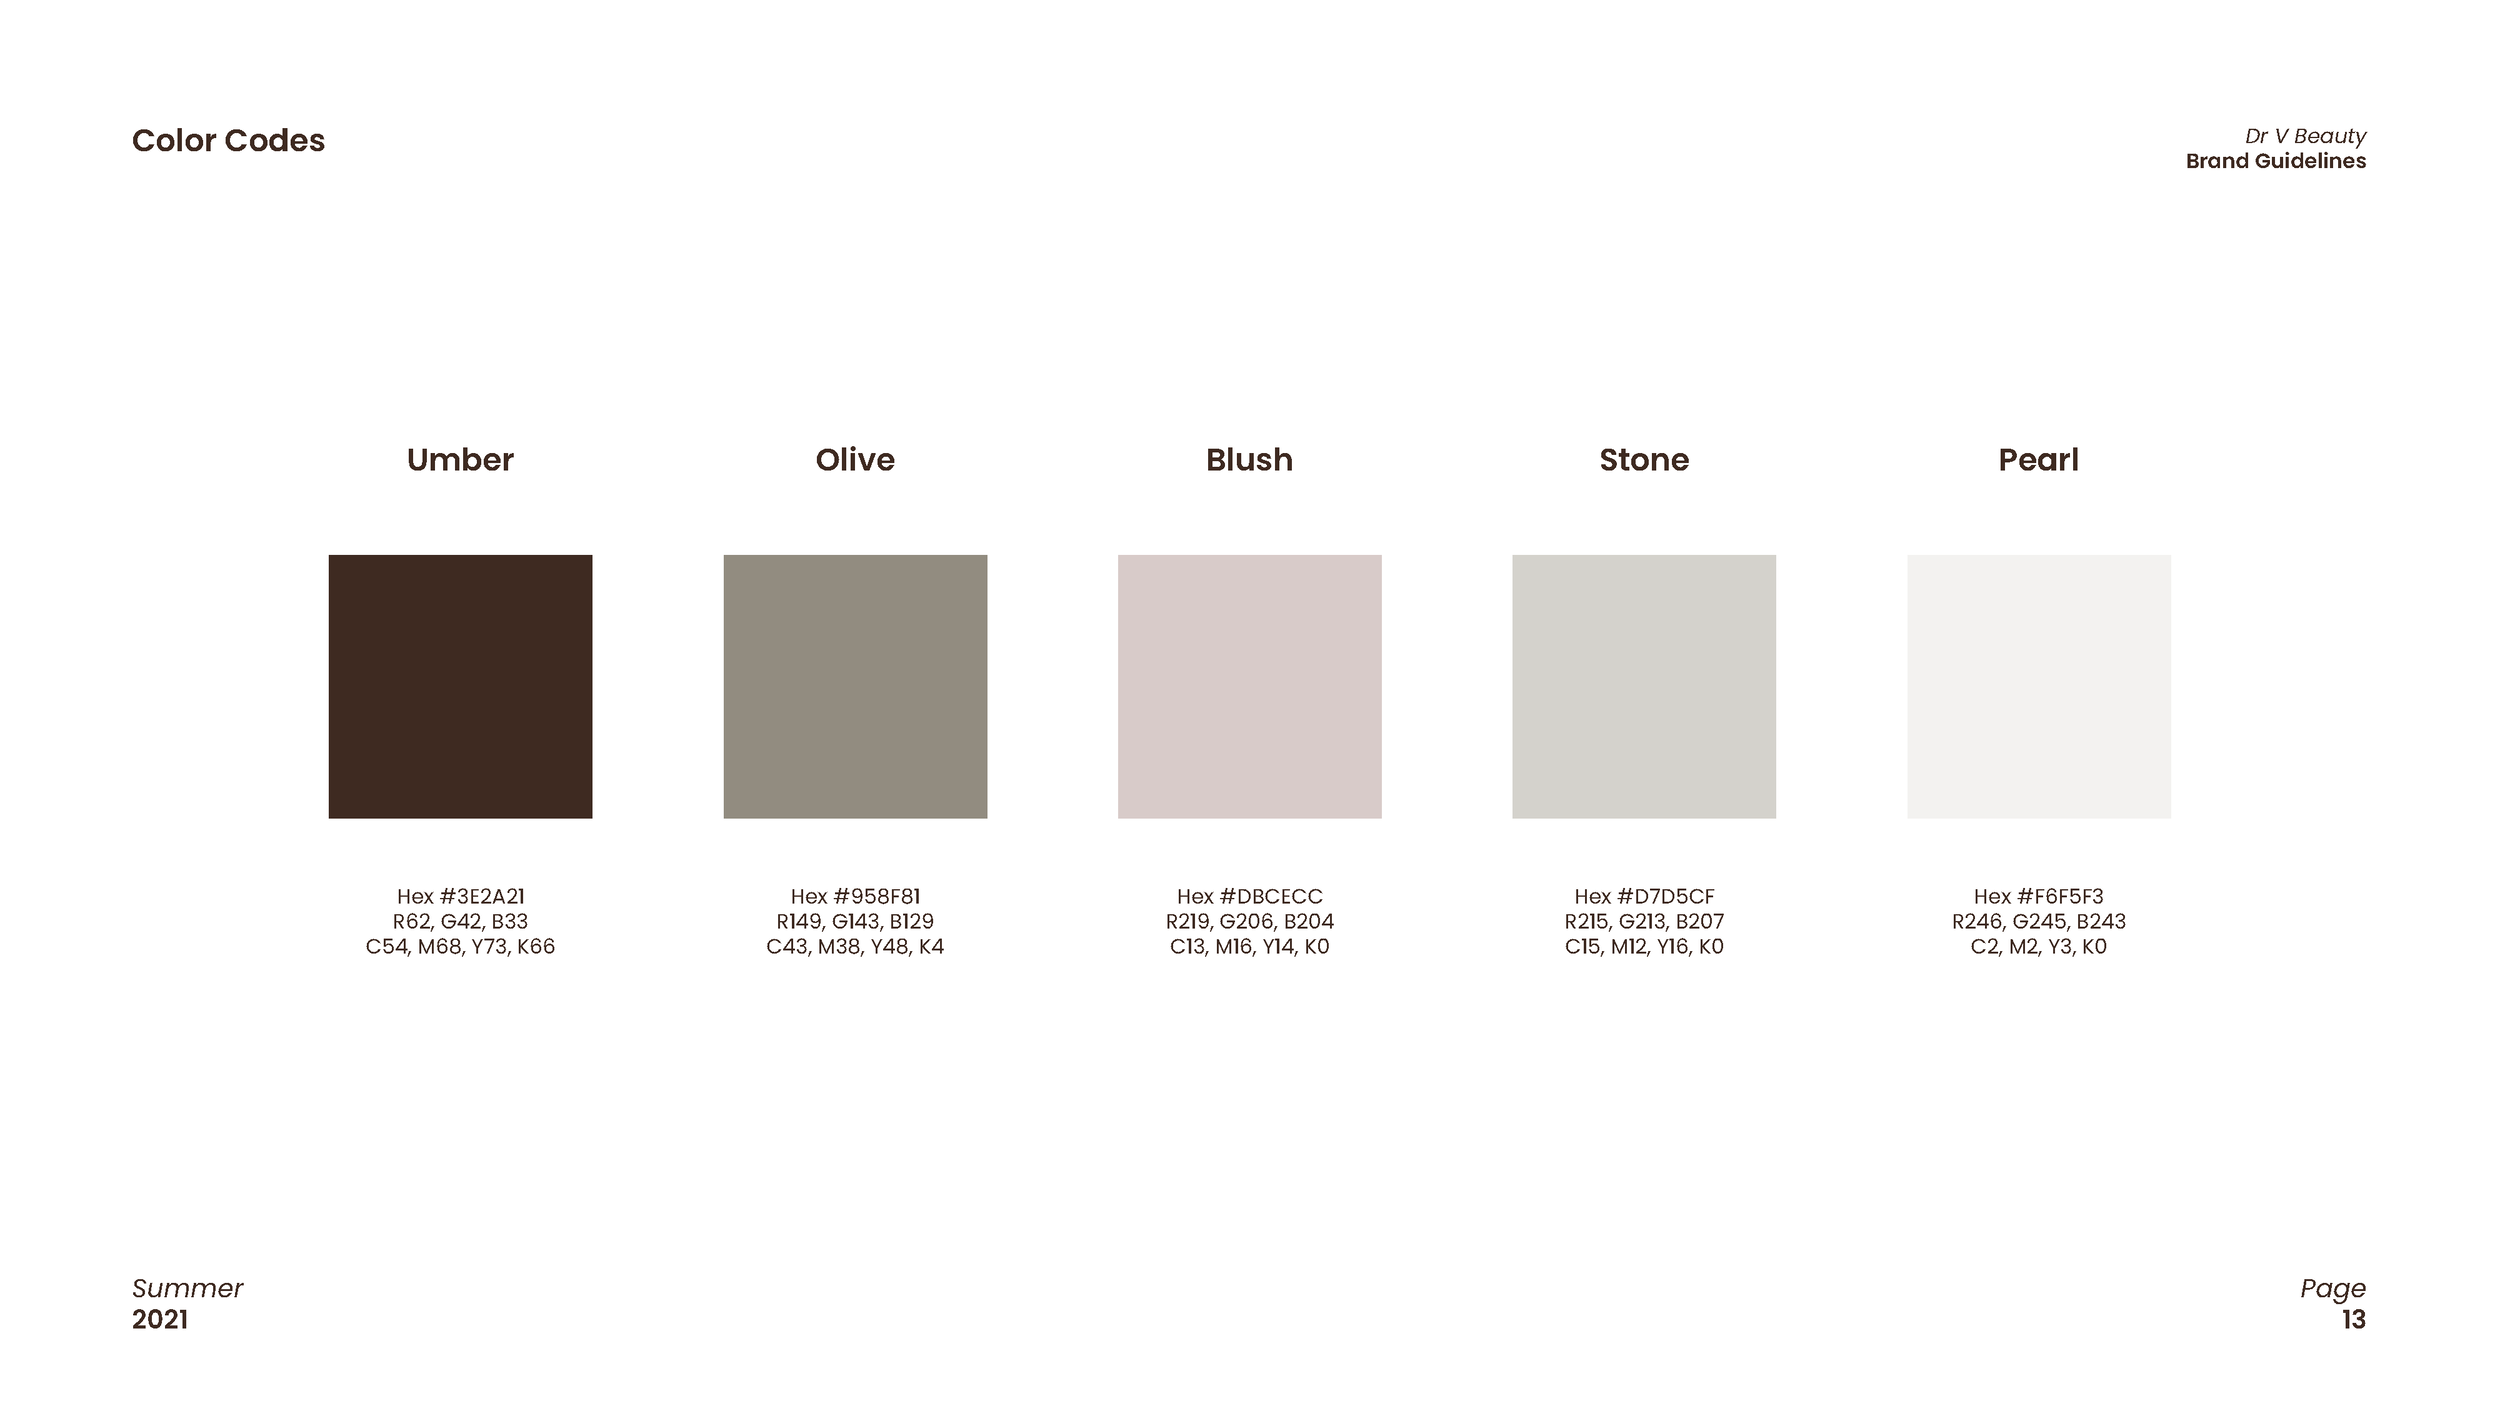 Dr V Beauty - Brand Guidelines_Page_13.png